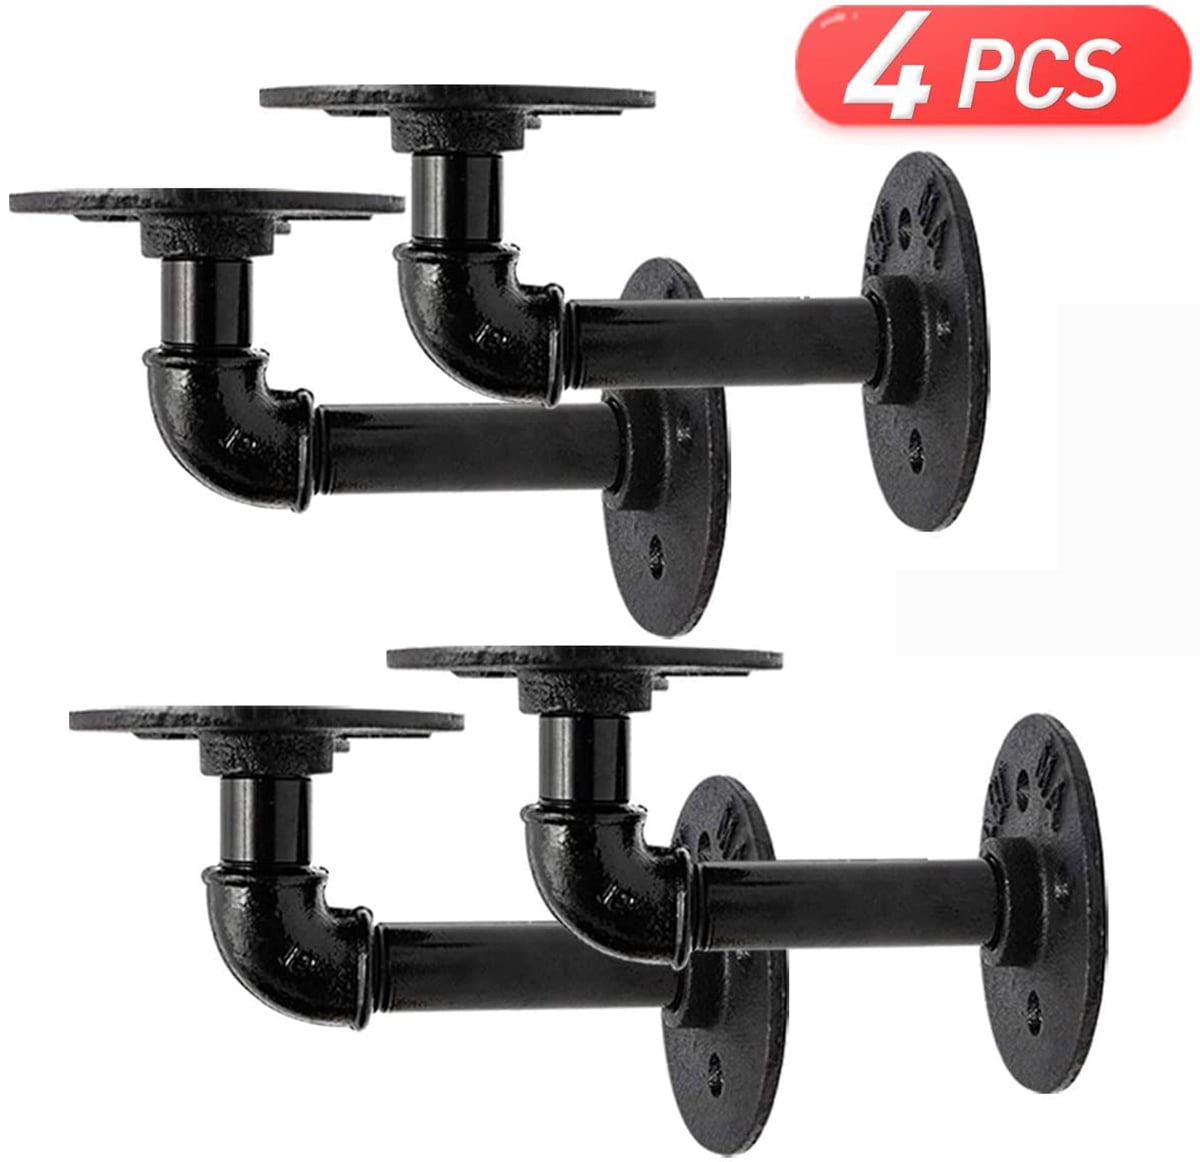 4 Pack 8 inch Industrial Black Iron Pipe Shelf Brackets Rustic Wall Mounted DIY 